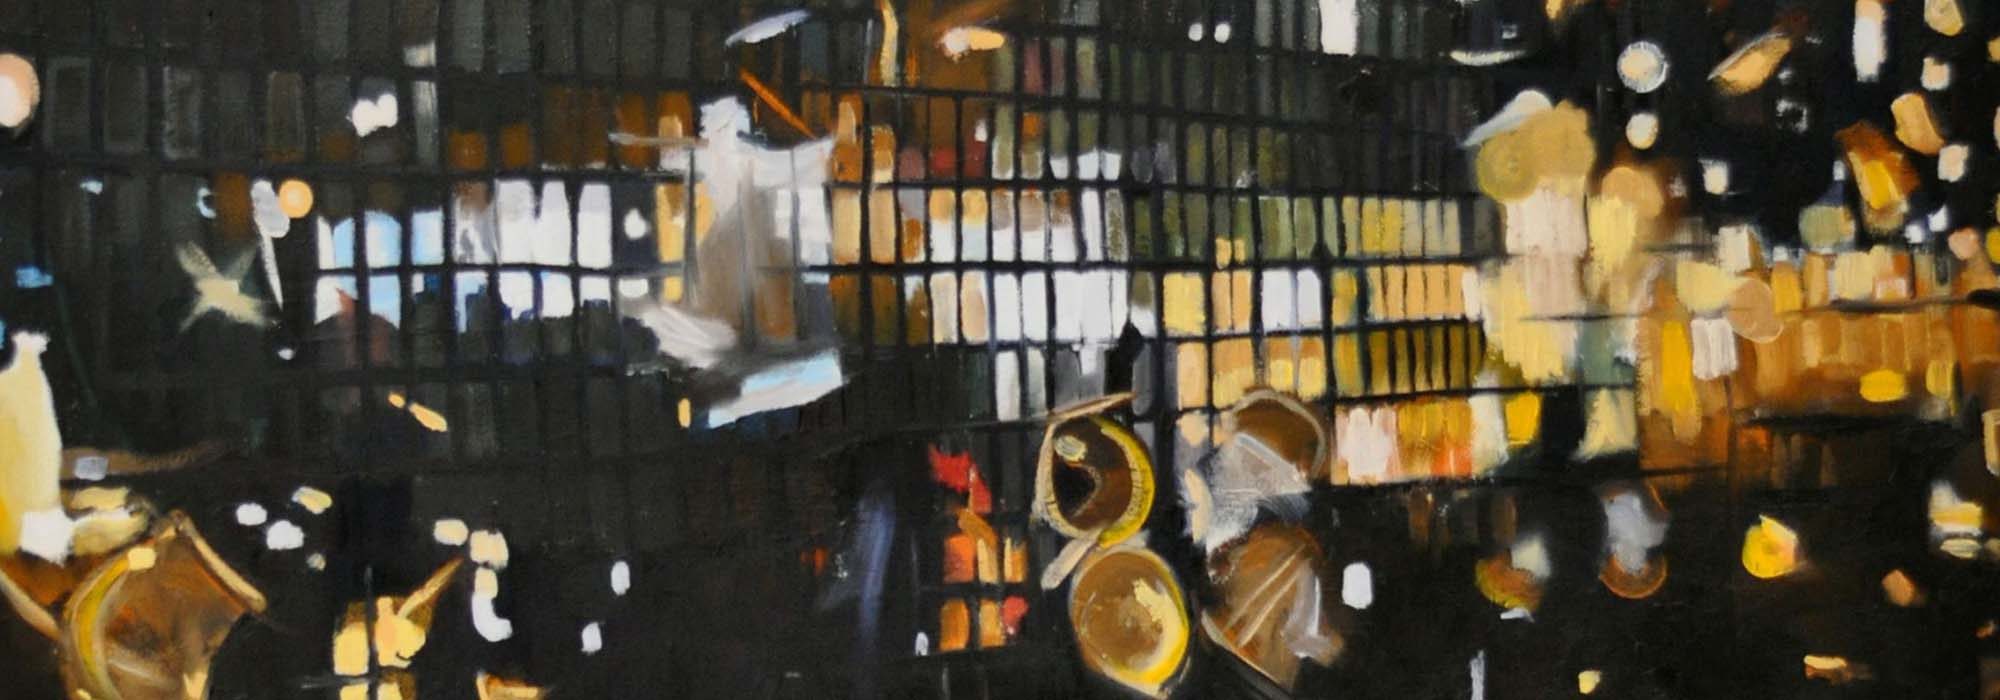 Greg Bennet's artwork Diffused depicts the view from his apartment on a rainy night.